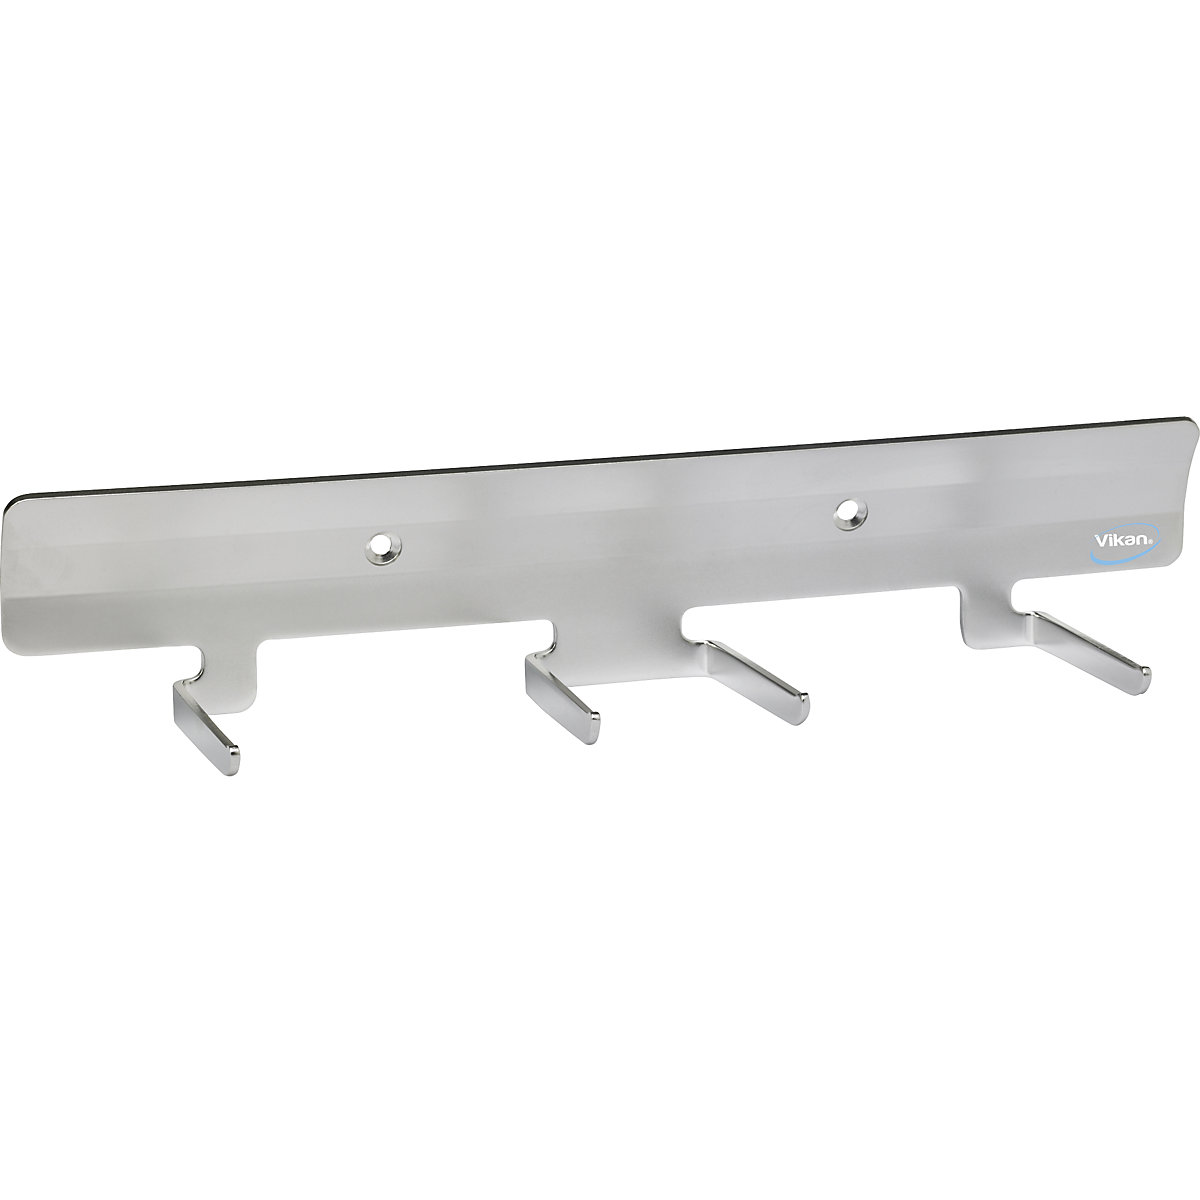 Vikan – Wall bracket, for up to 4 products, LxWxH 320 x 80 x 65 mm